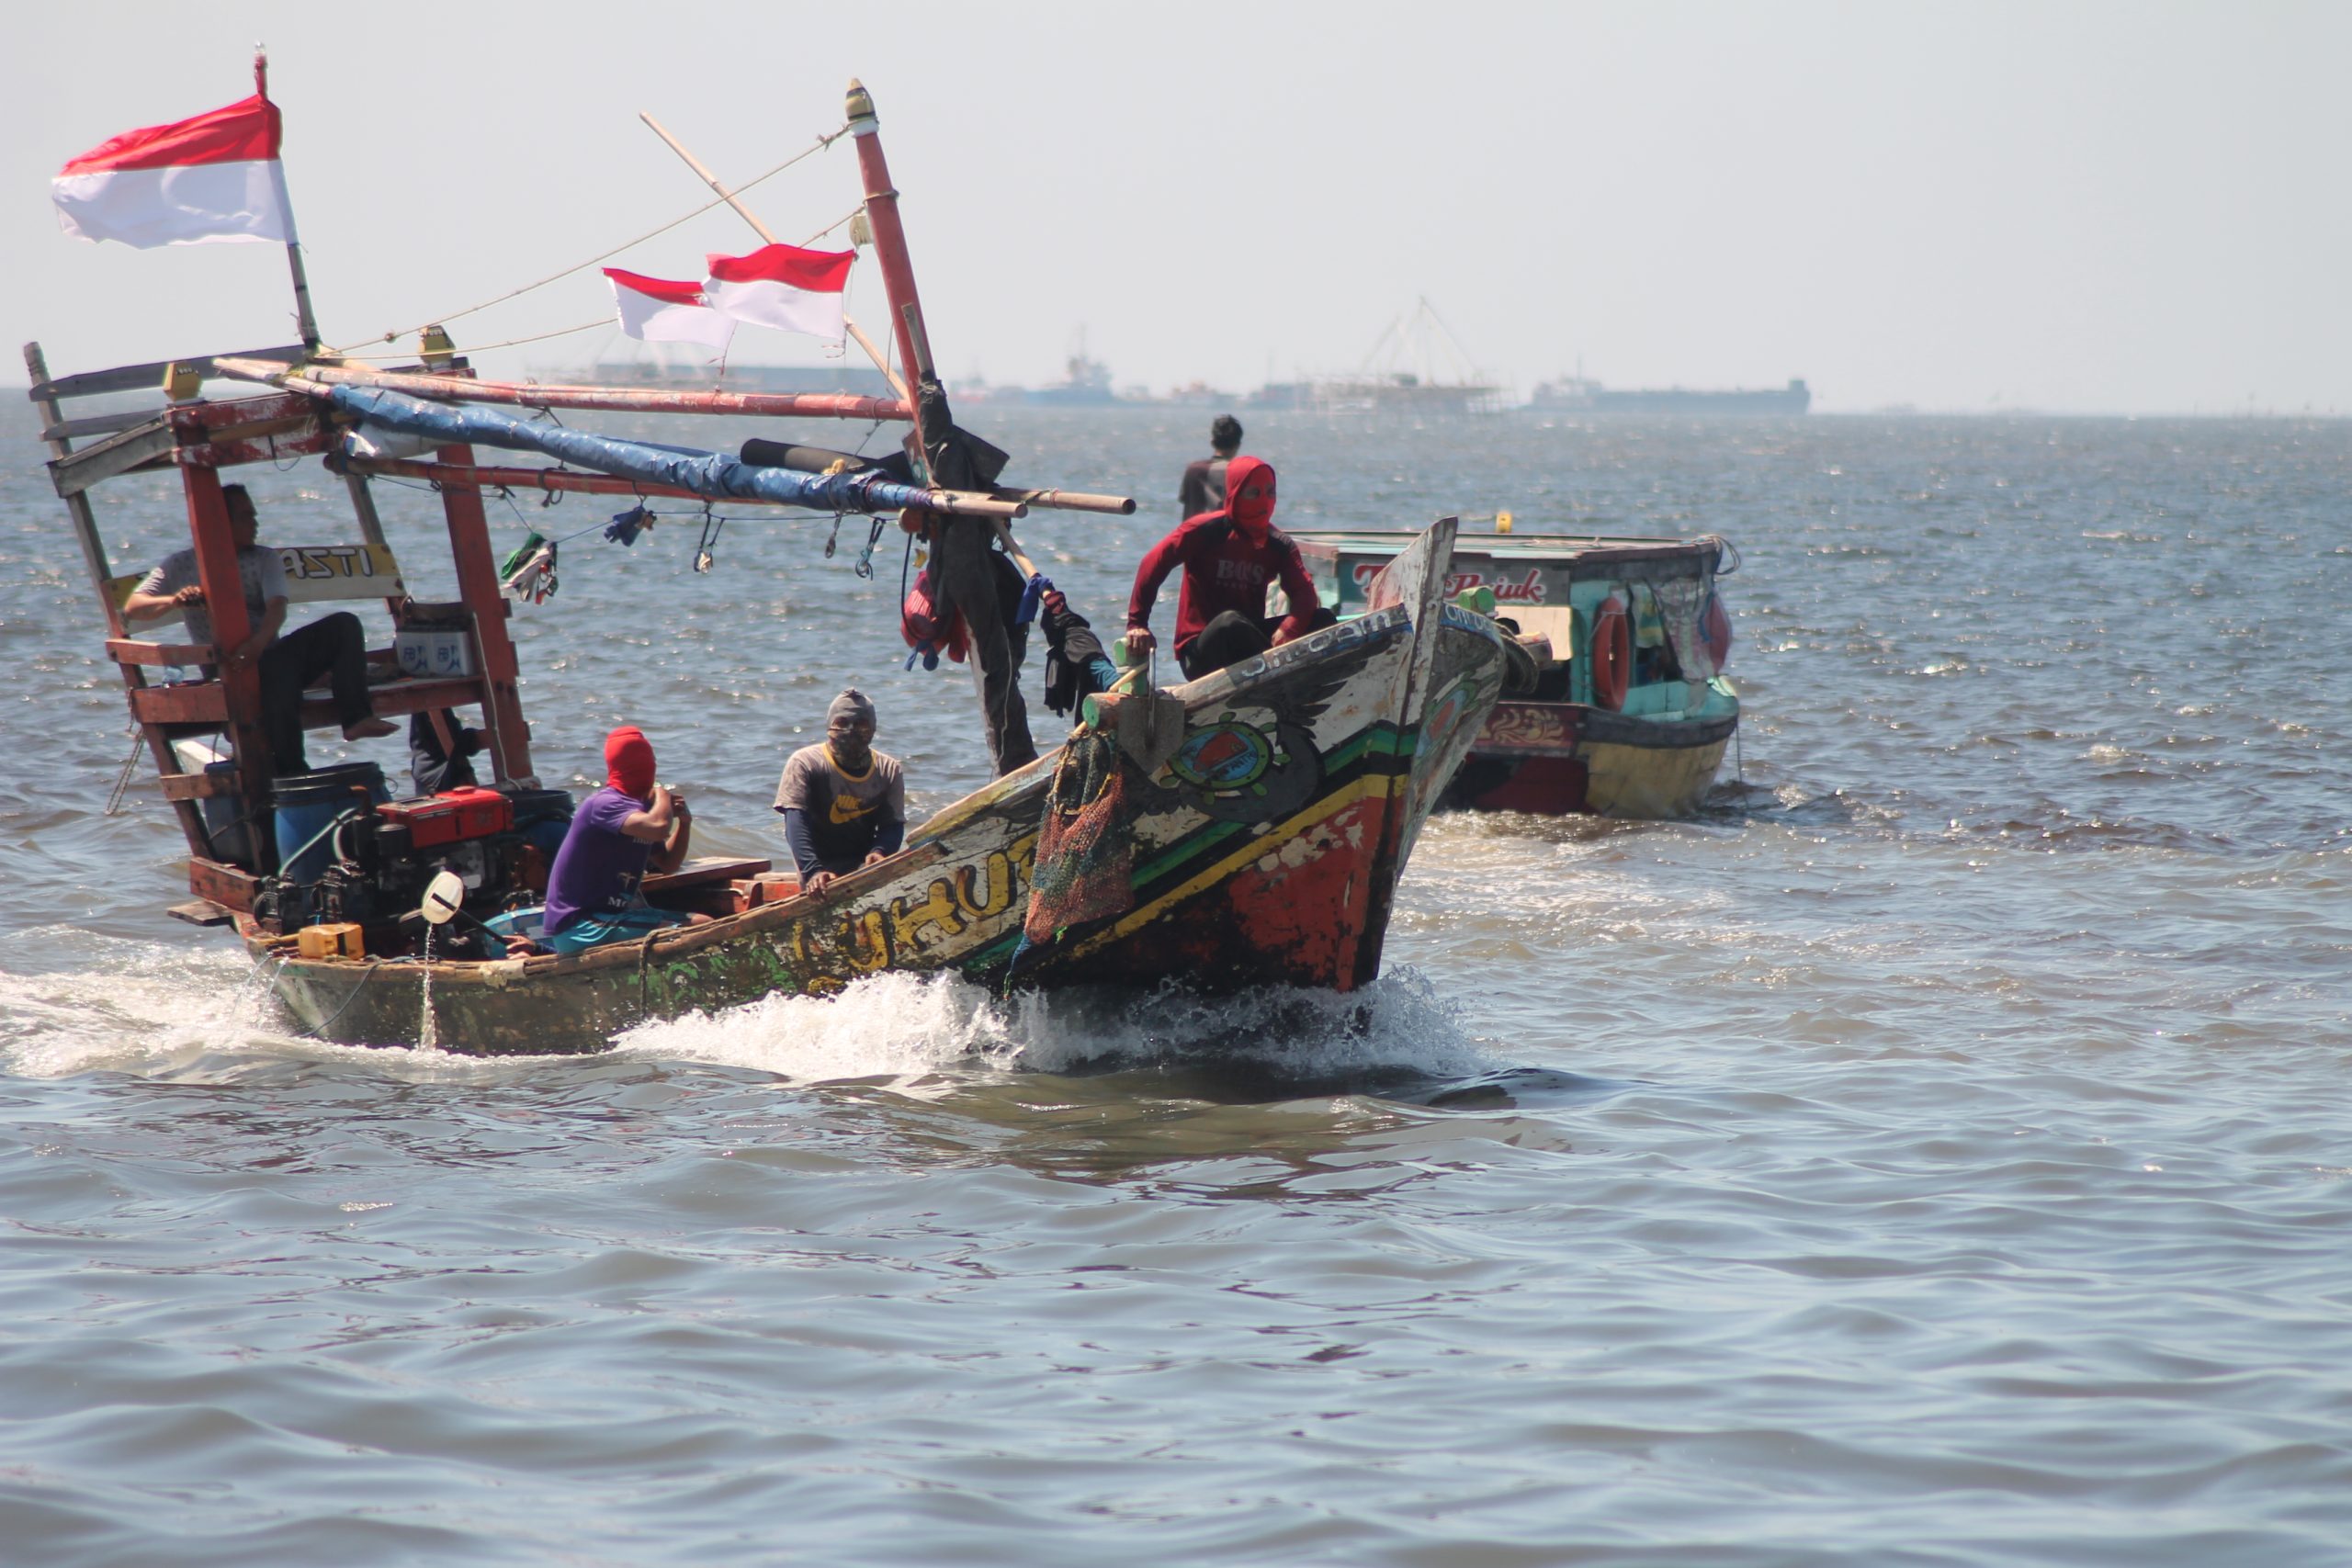 Indonesian fishermen find it difficult to make a living